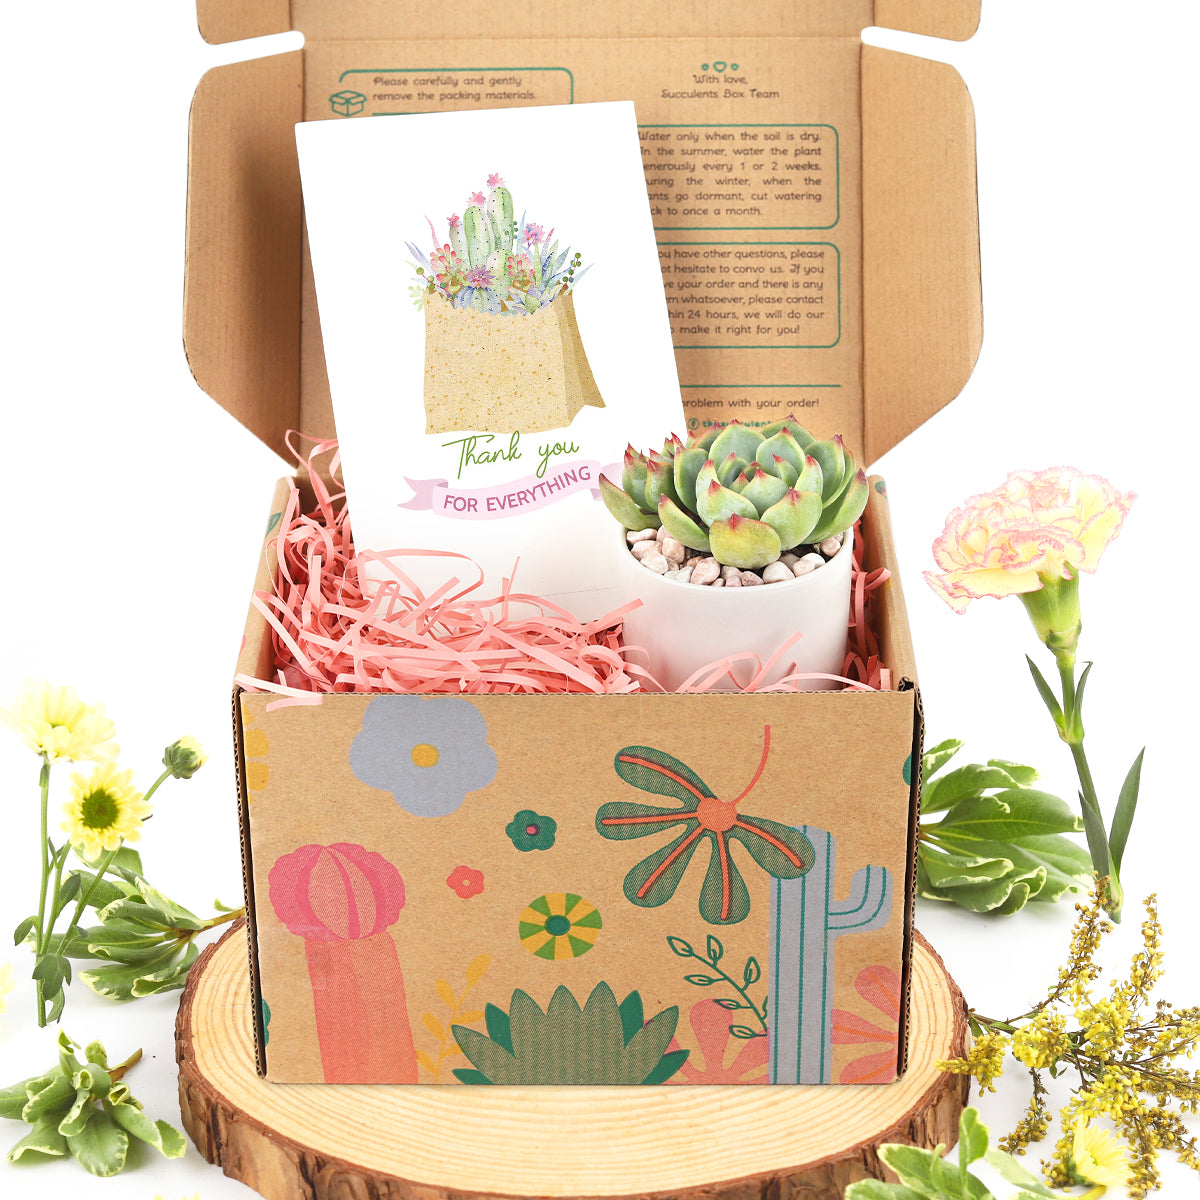 Succulent Gift Box for Mother's Day, Thank You Mom Gift Ideas, Live Plants as Gifts